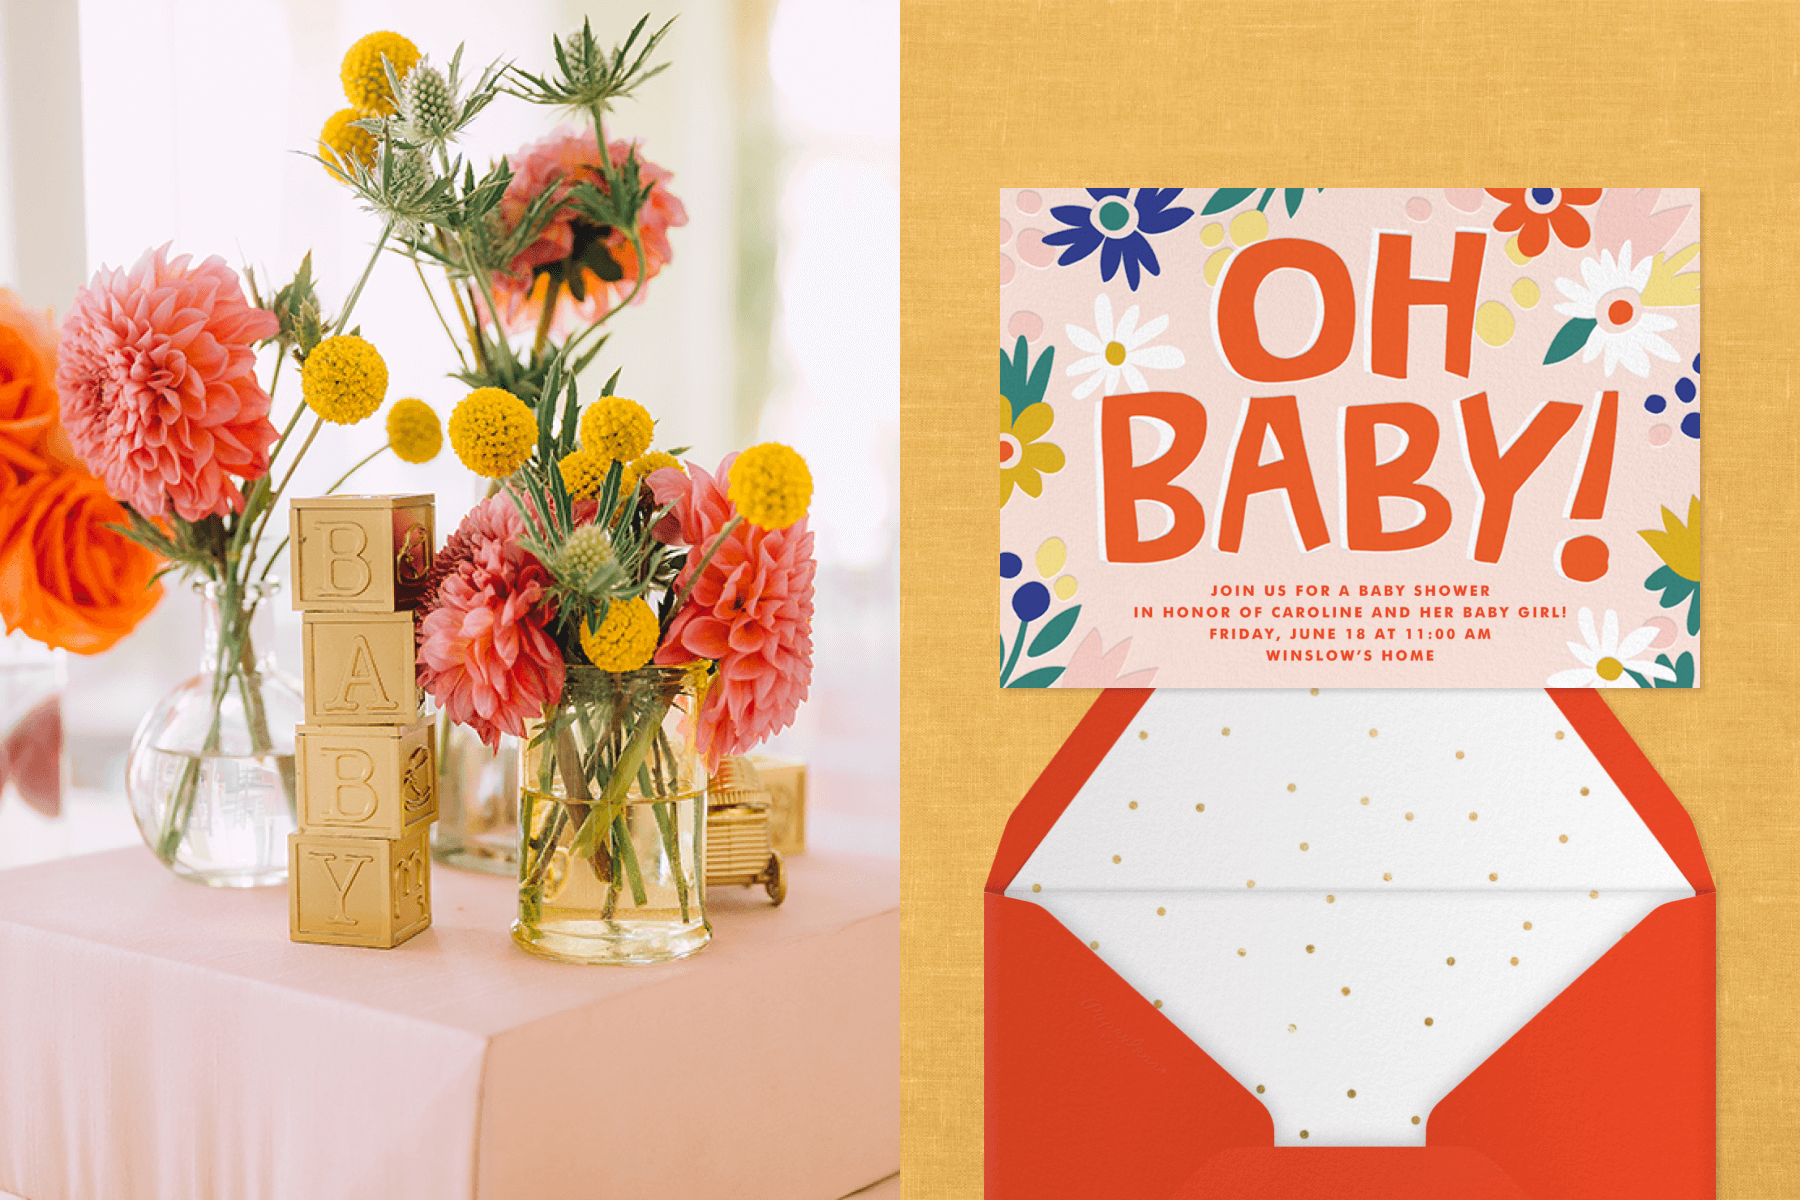 Left: Bright flowers in glass bud vases with blocks that read “BABY.” Right: An invitation with colorful simplified flower drawings and the words “OH BABY!”